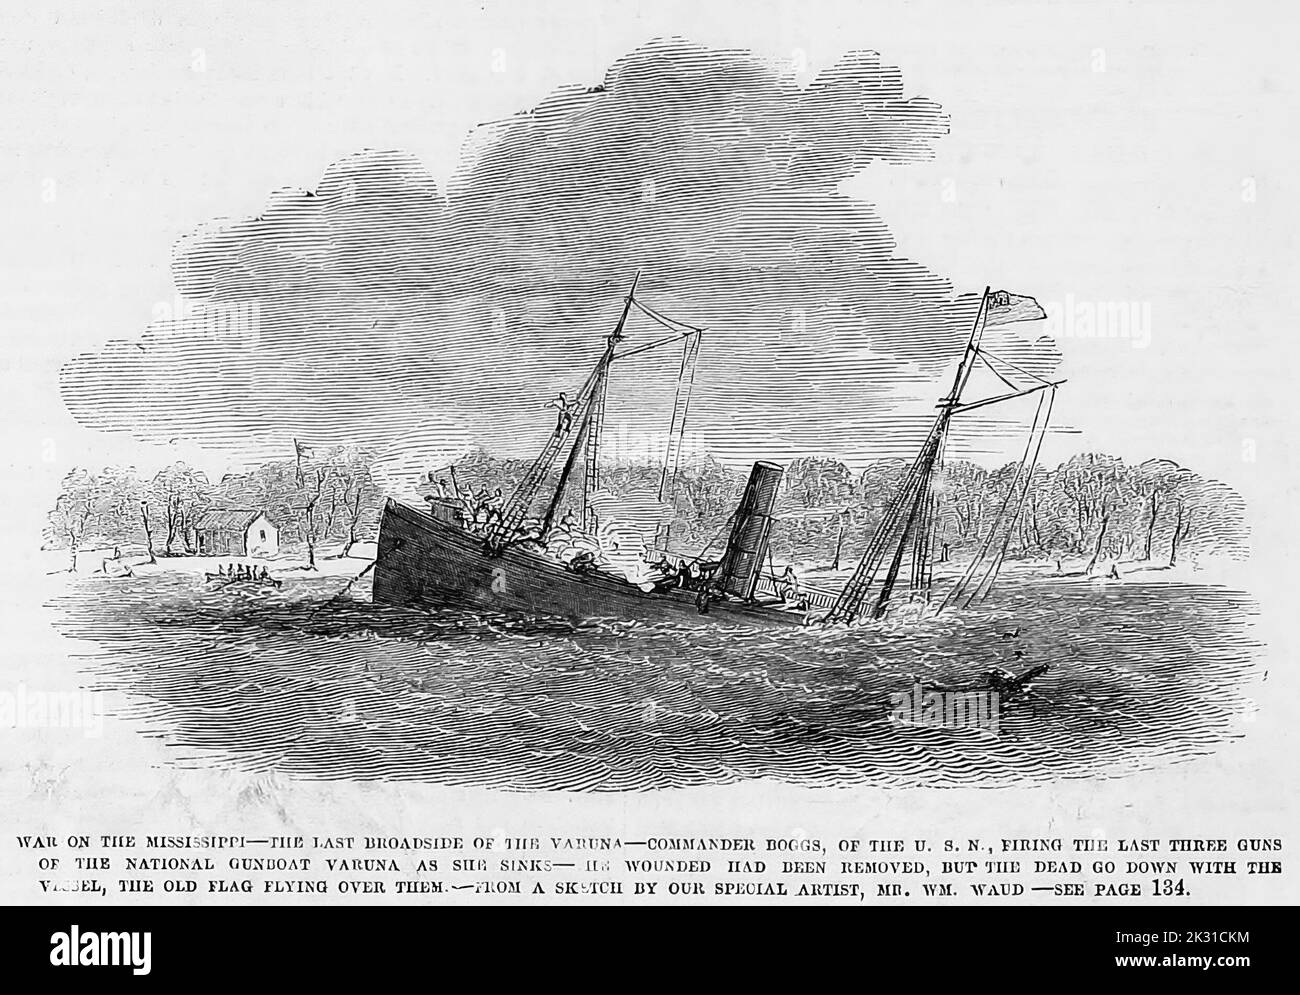 War on the Mississippi - The last broadside of the Varuna - Commander Charles Stewart Boggs firing the last three guns of the National gunboat Varuna as she sinks - The wounded had been removed, but the dead go down with the vessel, the old flag flying over them. April 24th, 1862. 19th century American Civil War illustration from Frank Leslie's Illustrated Newspaper Stock Photo